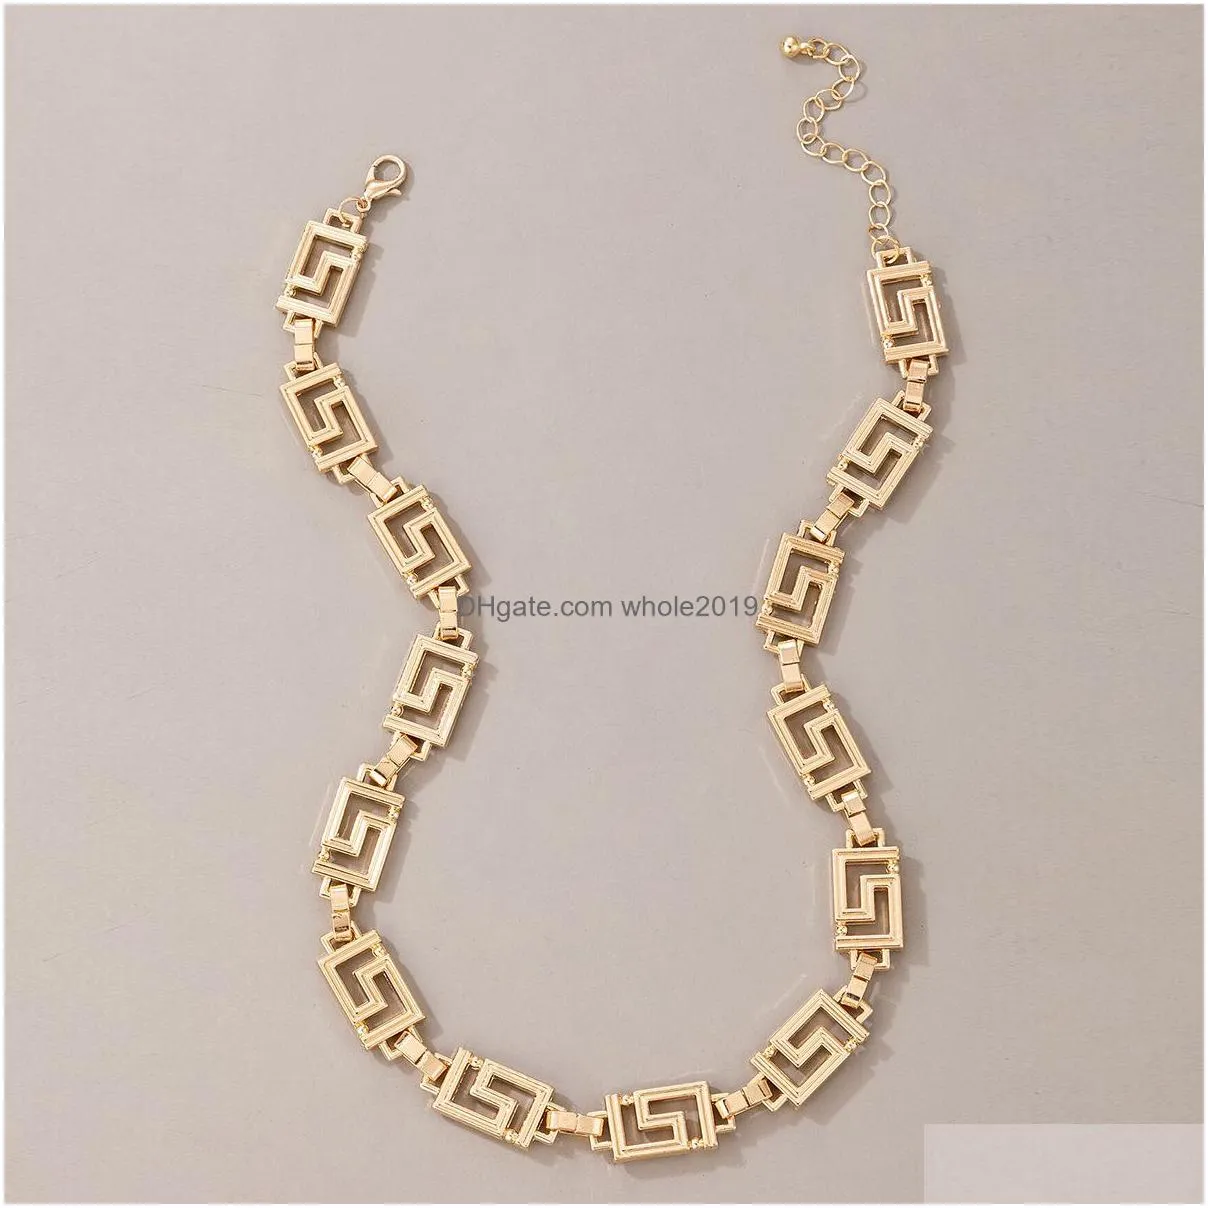 fashion jewelry labyrinth monolayer neck chain necklace short choker necklaces